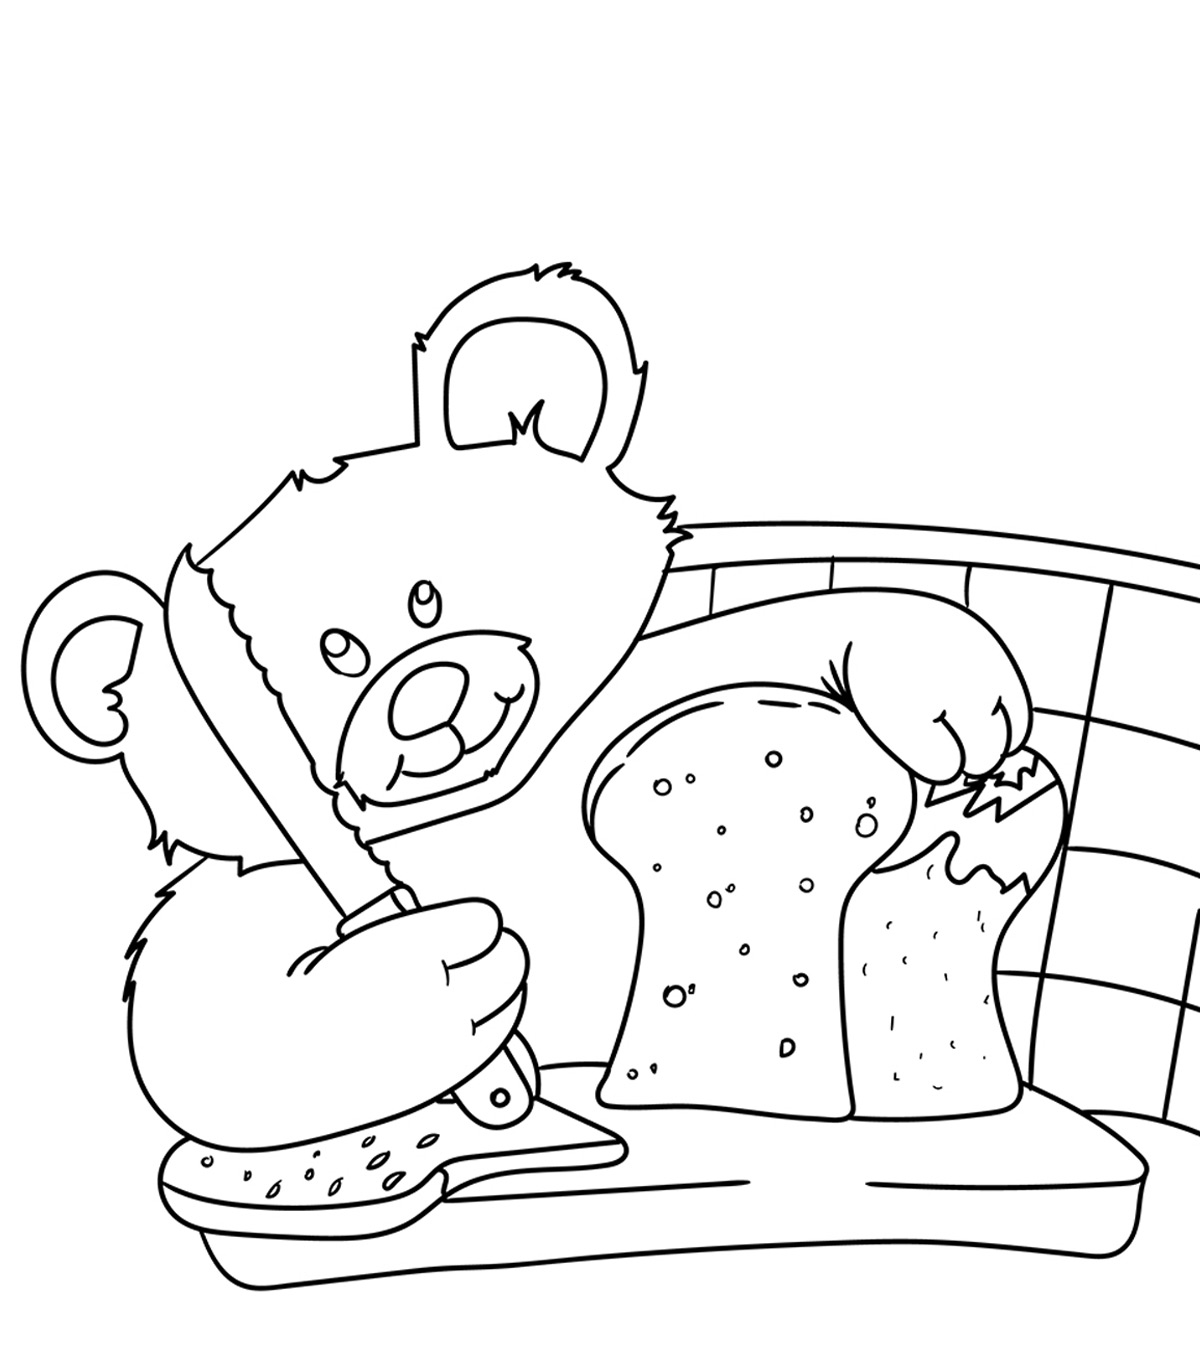 10 Yummy Bread Coloring Pages For Your Little One_image